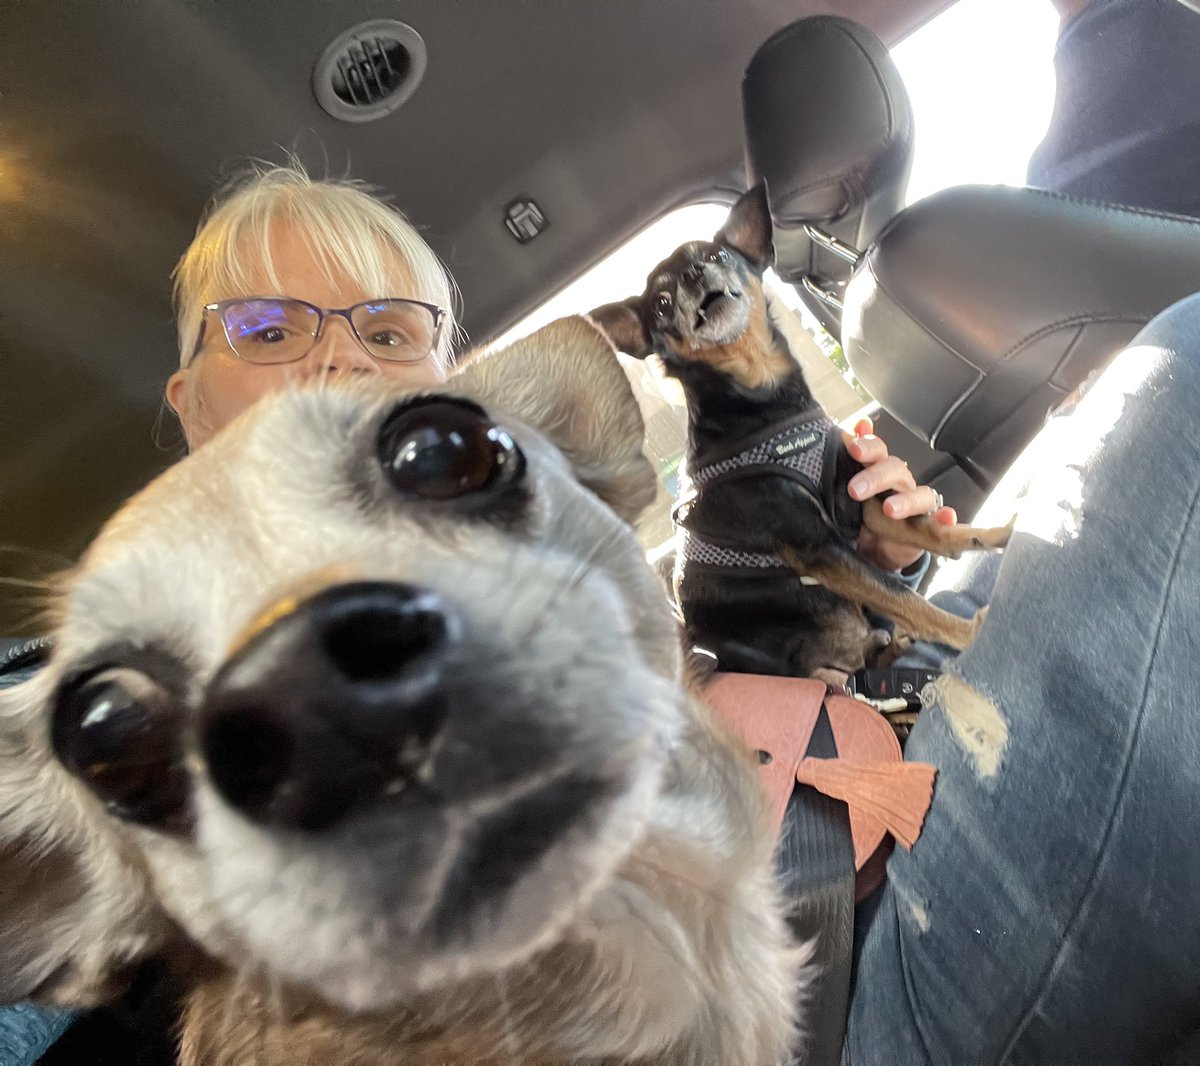 #puppylove #Rescues #backseatdrivers